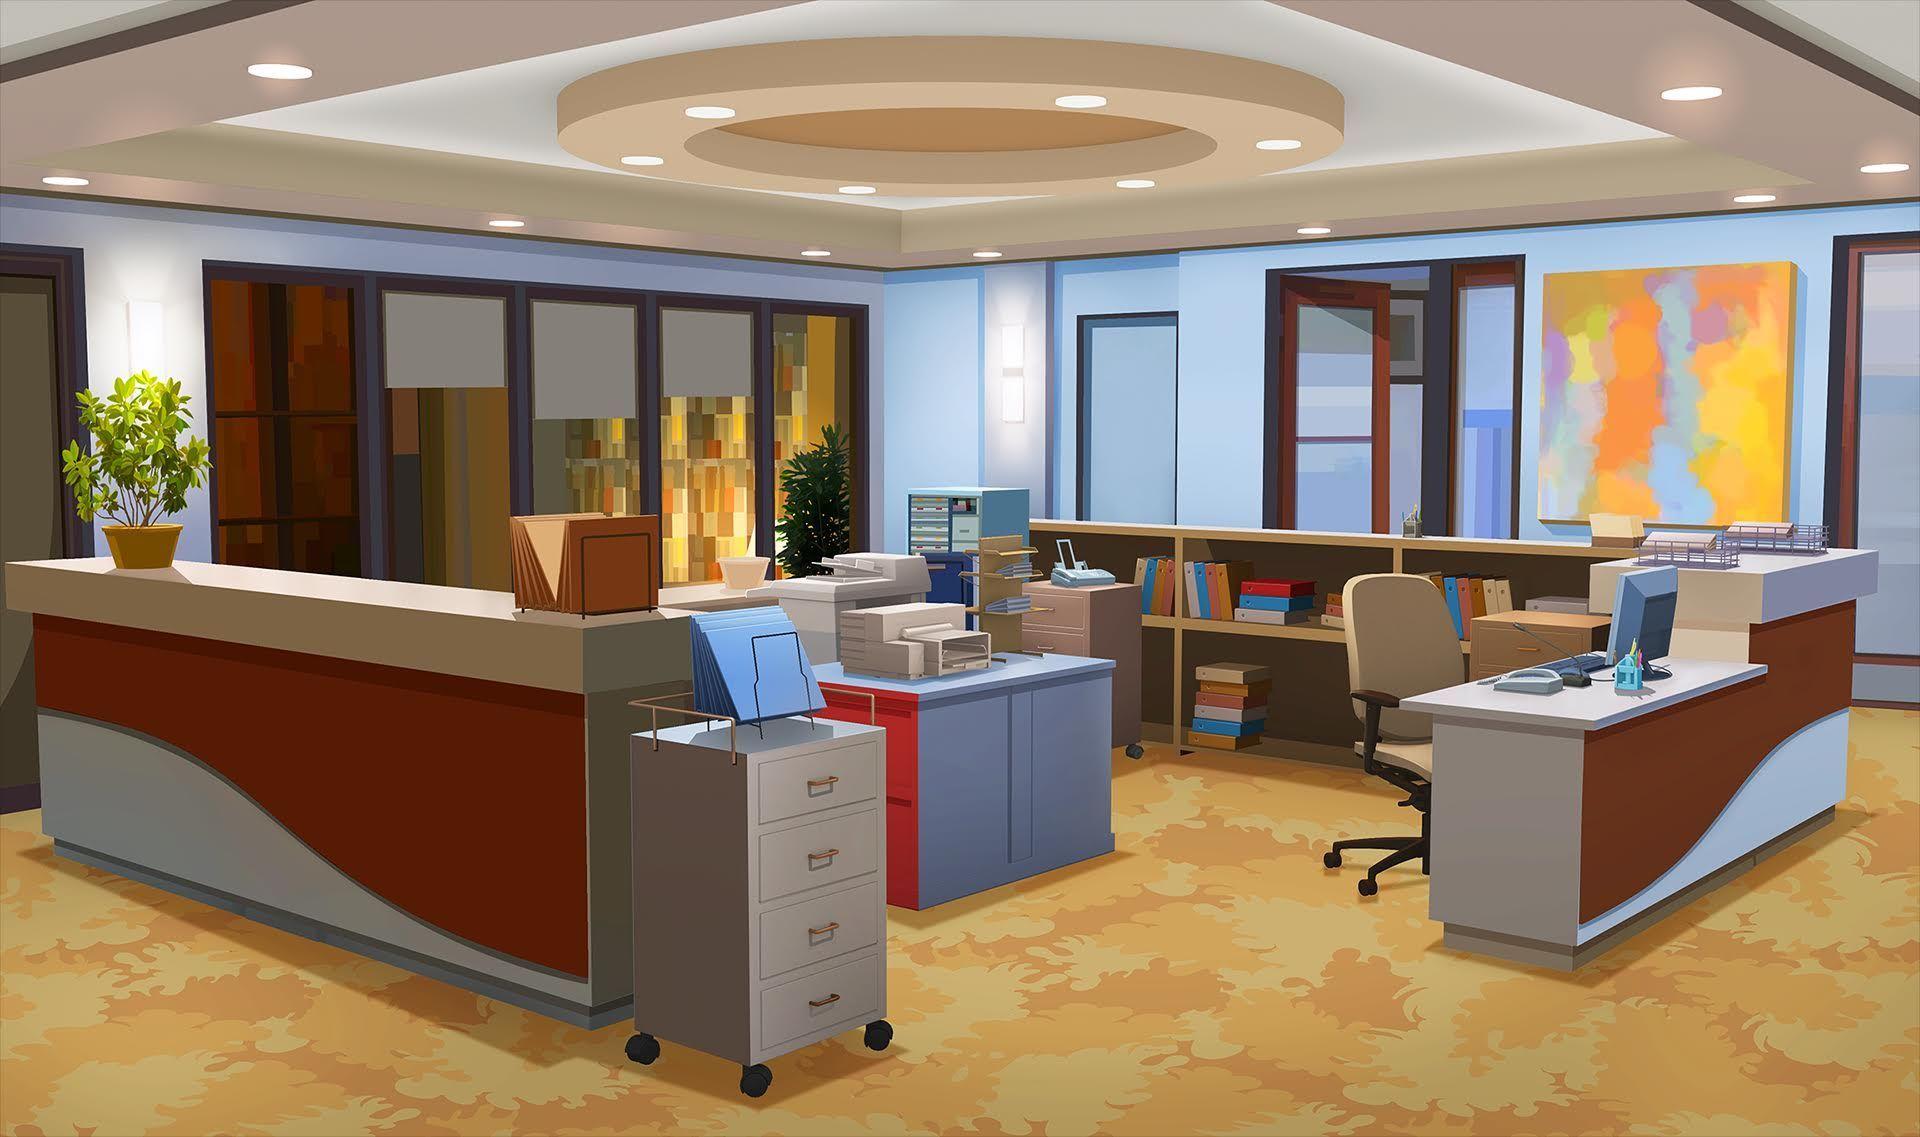 Anime office Wallpapers - Top Free Anime office Backgrounds